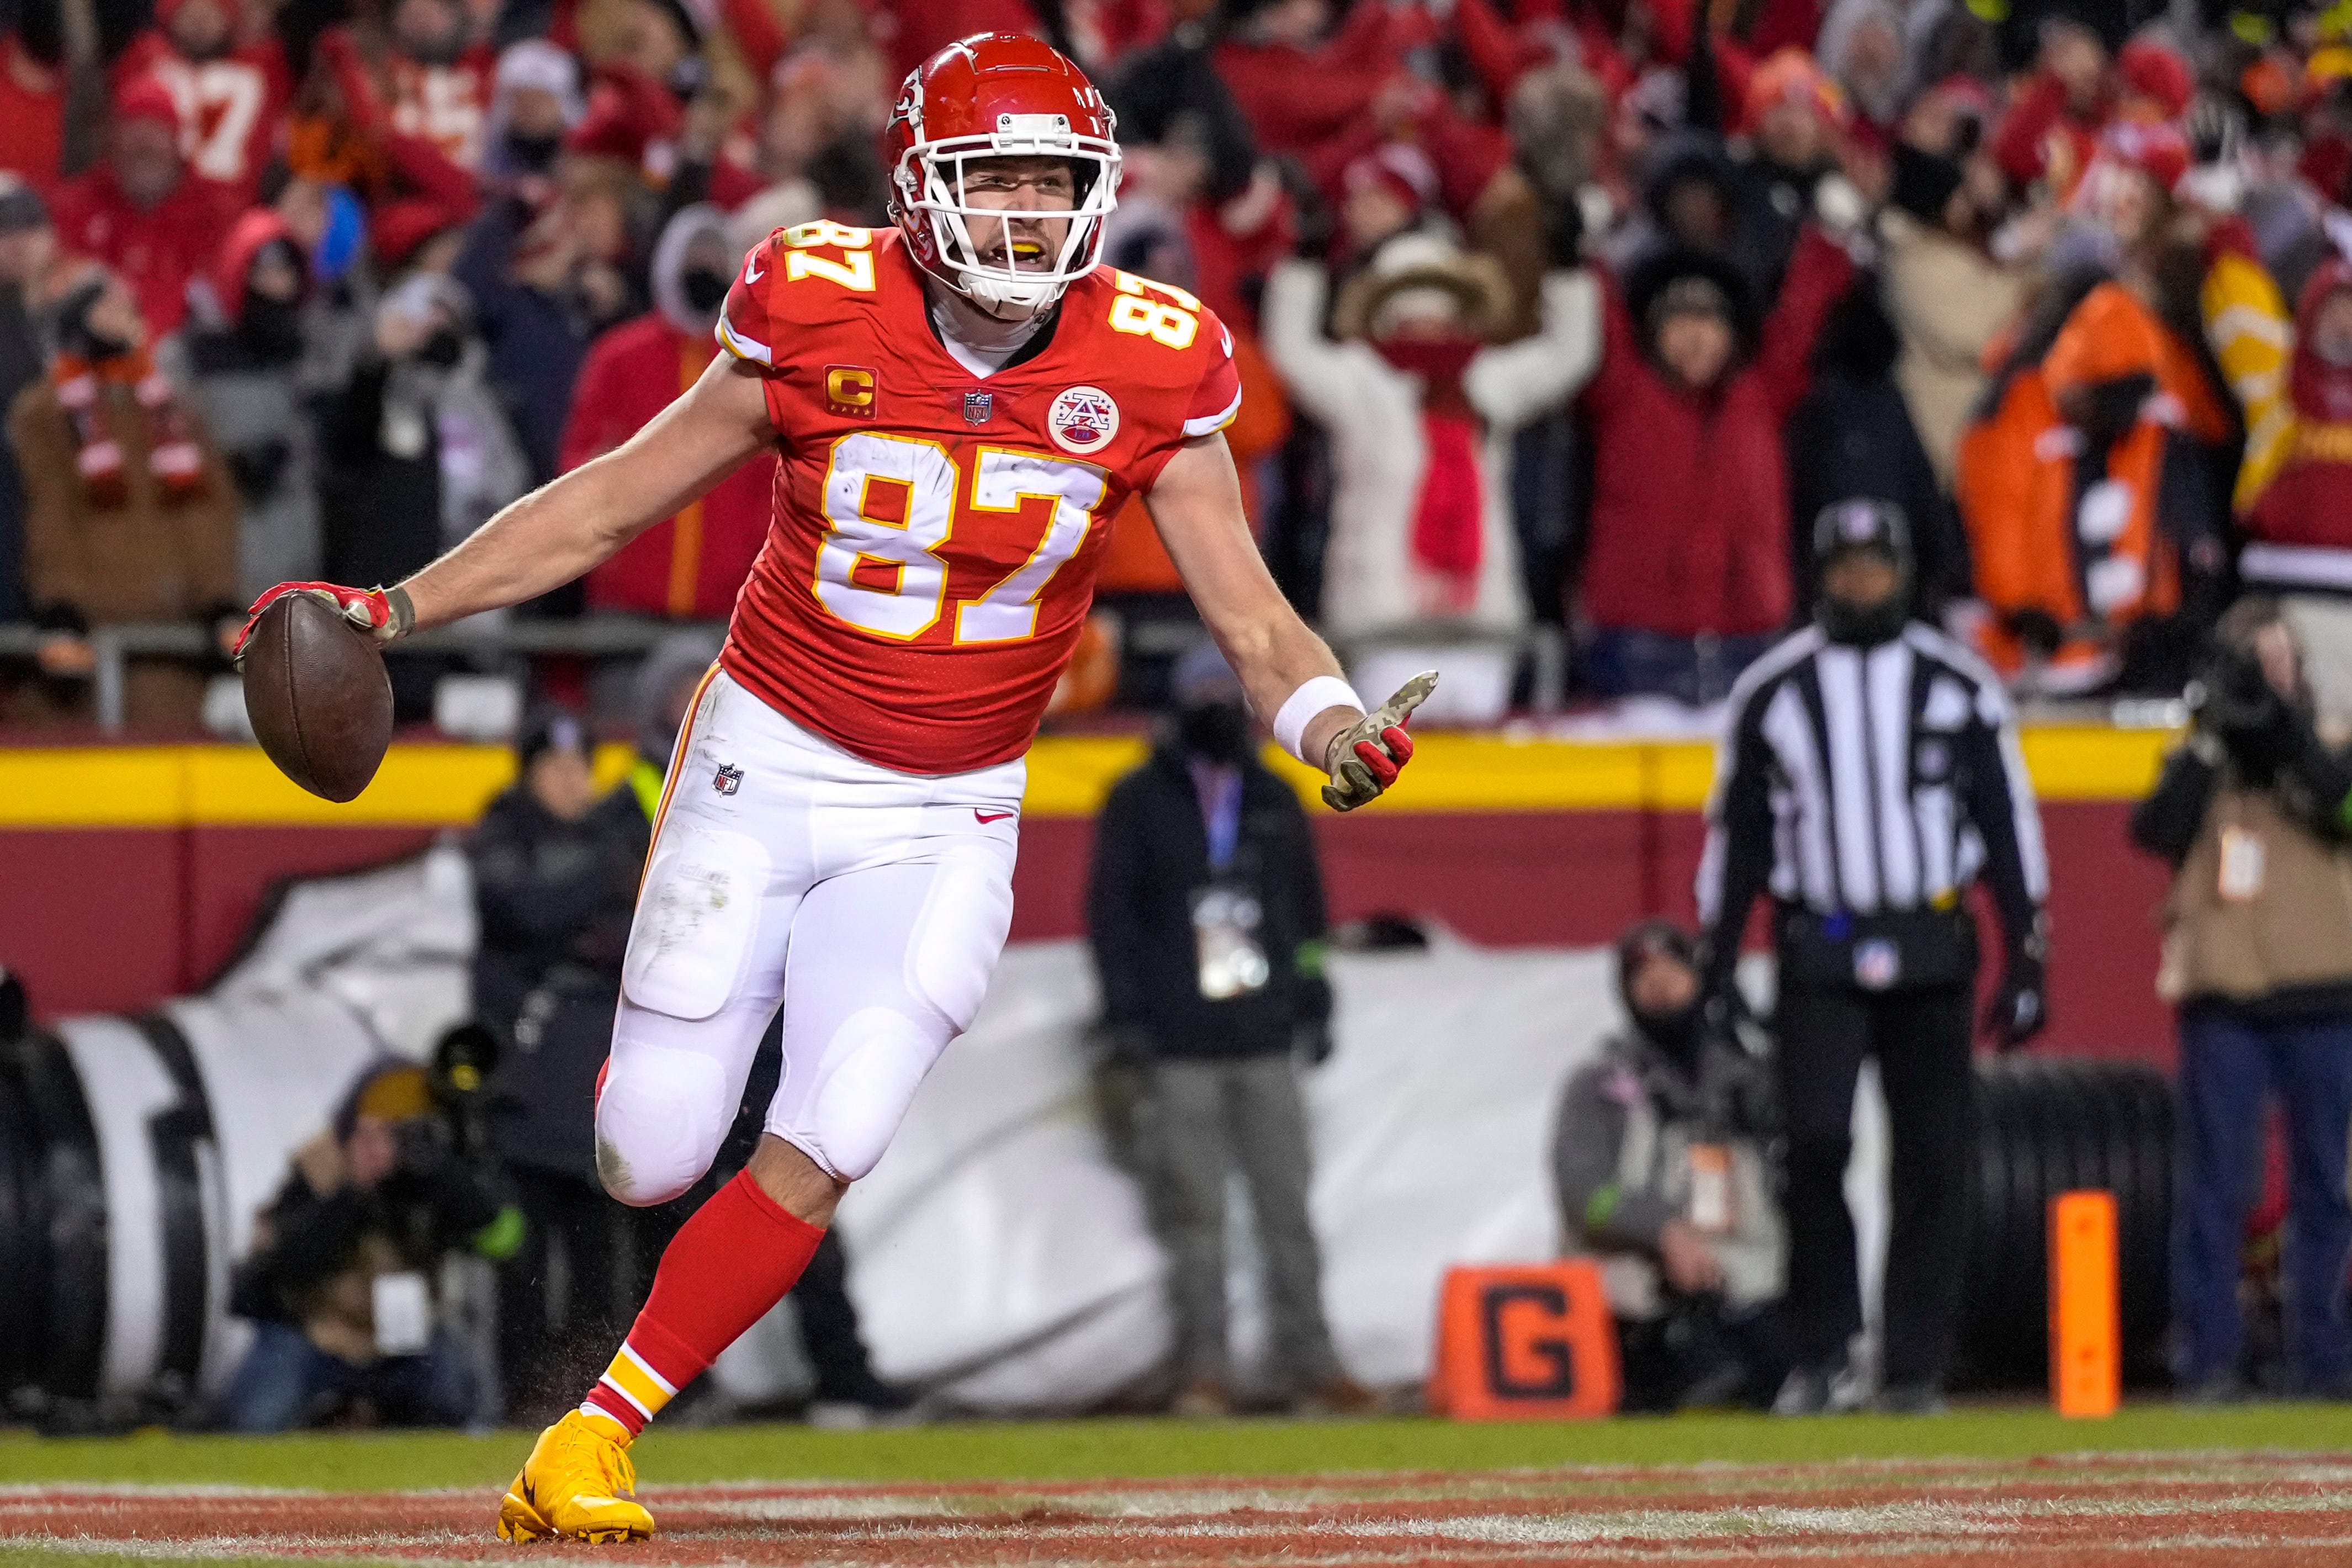 Kansas City Chiefs tight end Travis Kelce (87) celebrates a touchdown catch in the second quarter of the AFC championship NFL game between the Cincinnati Bengals and the Kansas City Chiefs, Sunday, Jan. 29, 2023, at Arrowhead Stadium in Kansas City, Mo. The Chiefs led 13-6 at halftime. Cincinnati Bengals At Kansas City Chiefs Afc Championship Jan 29 055